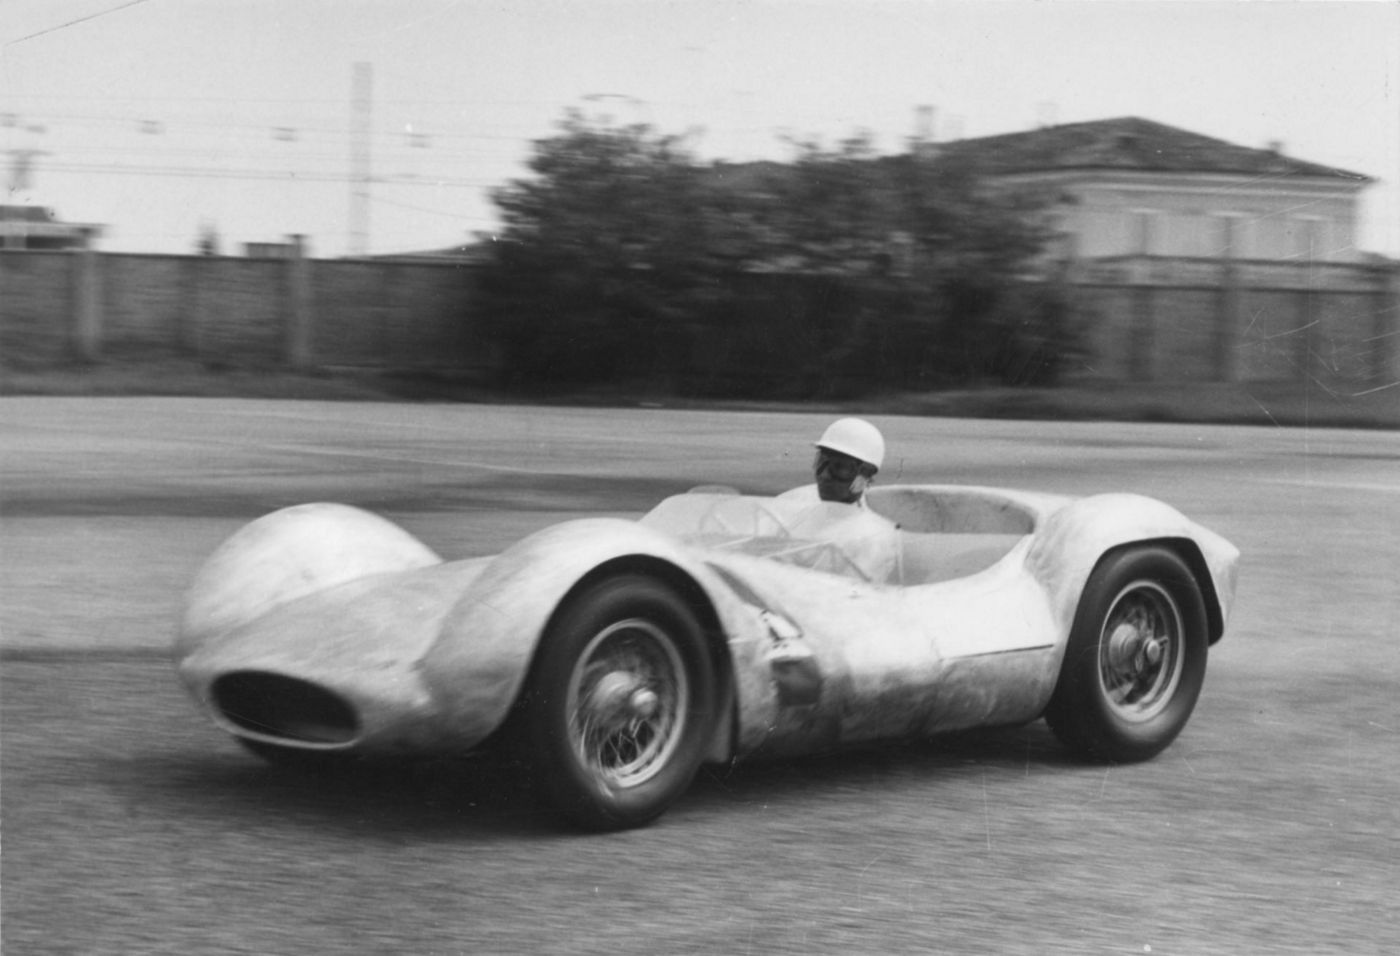 Tipo_60_Birdcage_1959_Test_Stirling_Moss_Modena